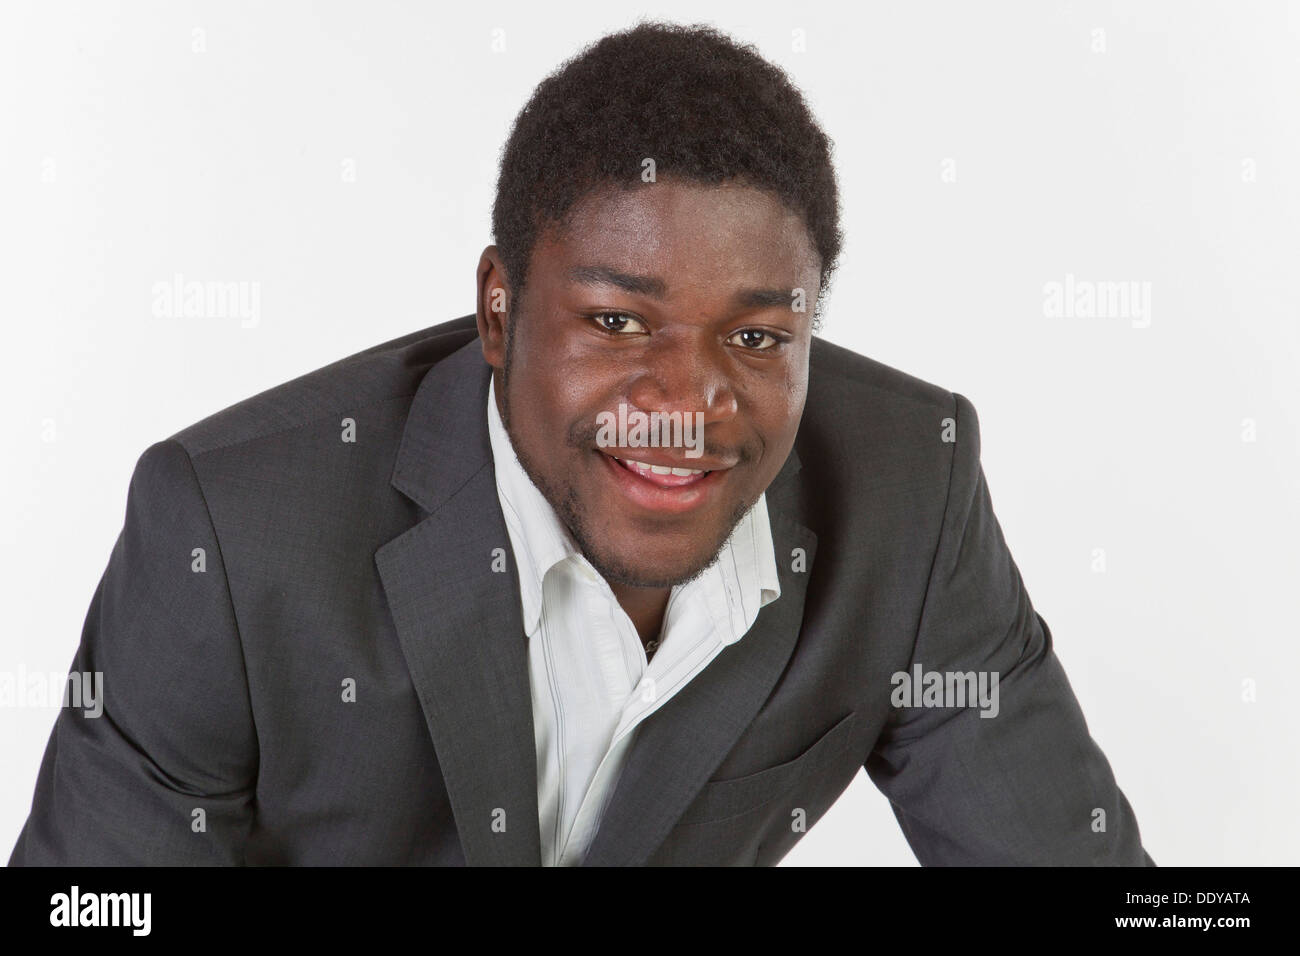 Young black man in a suit, portrait Stock Photo